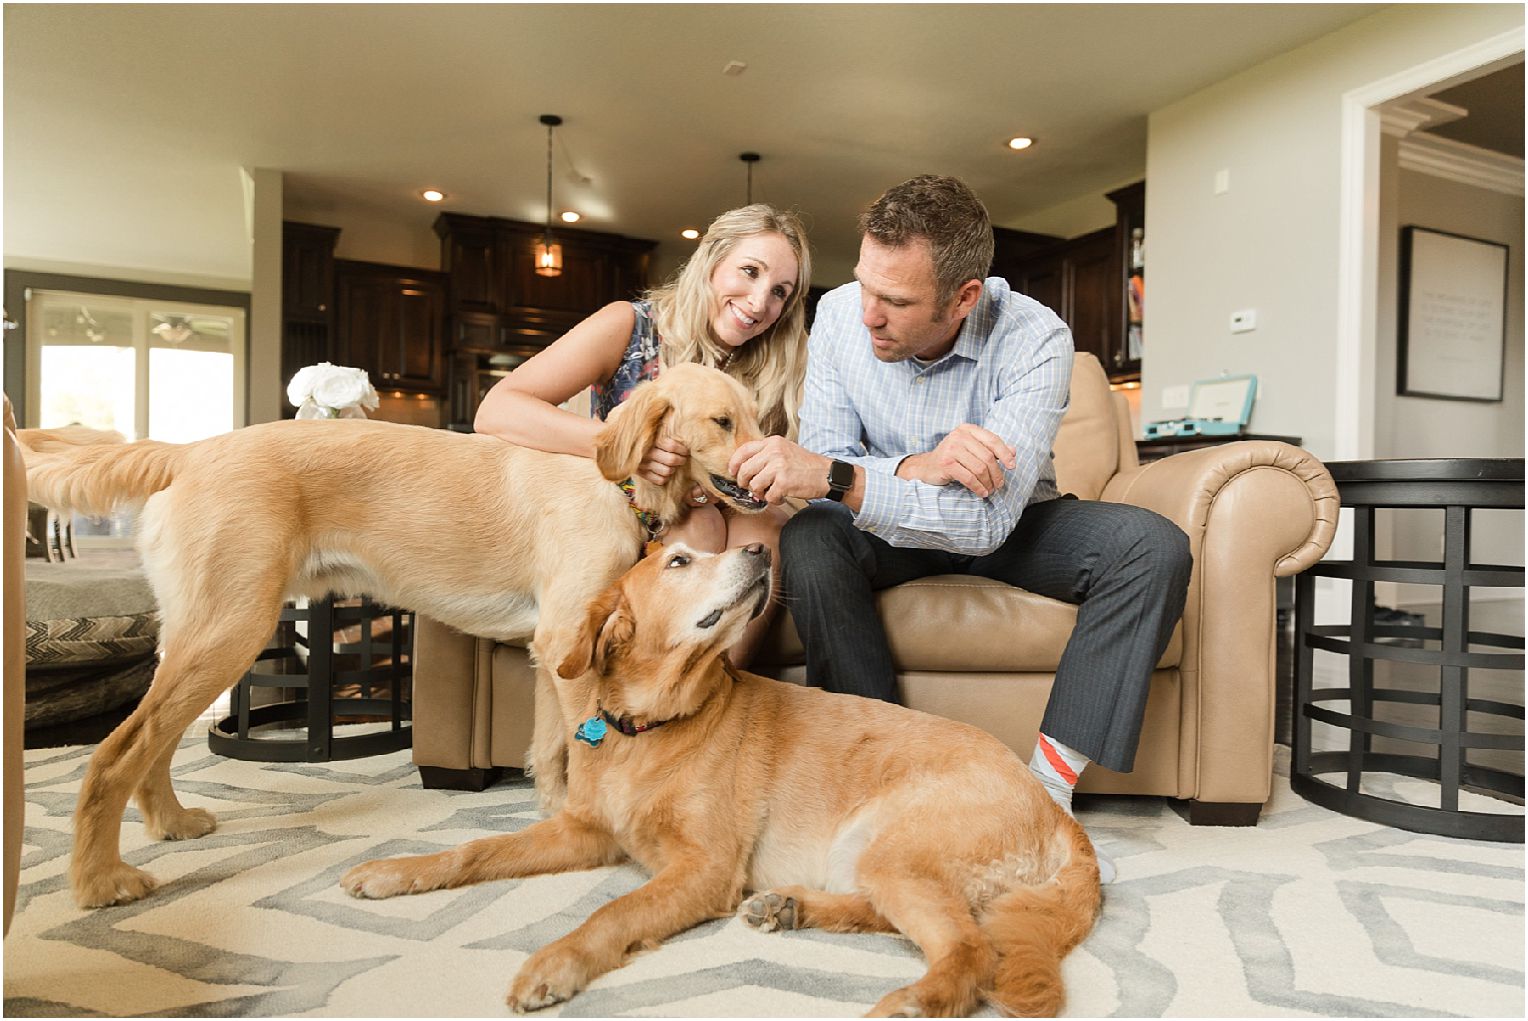 Kansas City Engagement Photos - at home lifestyle session with dogs